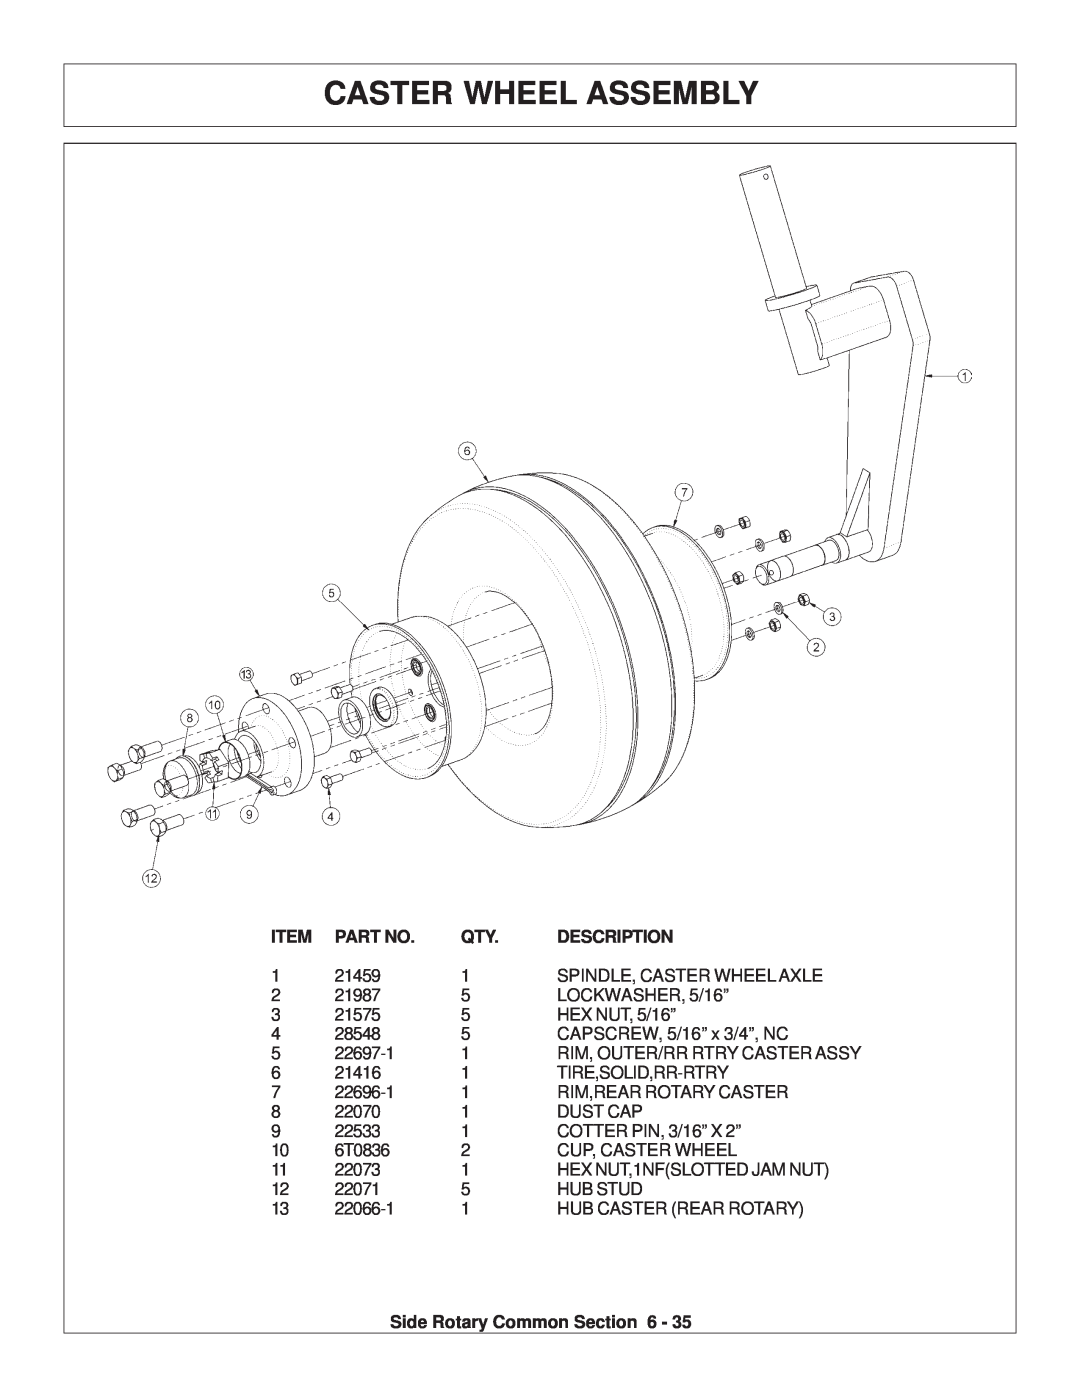 Tiger Products Co., Ltd TS 100A manual Caster Wheel Assembly, Rim, Outer/Rr Rtry Caster Assy 